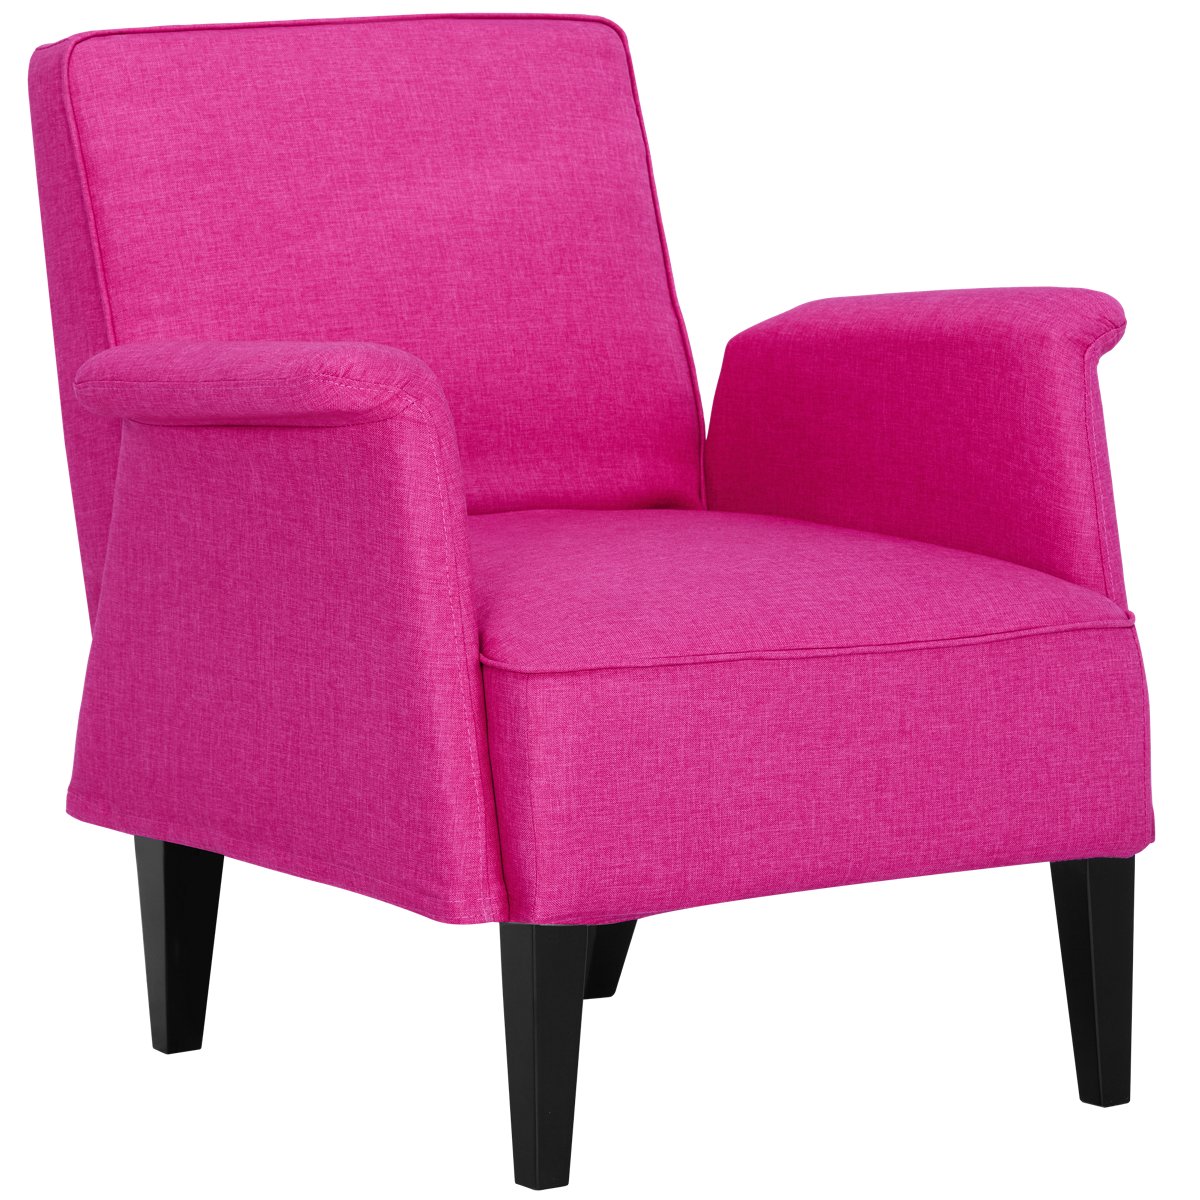 Luxury Pink Occasional Chair D60 About Remodel Stylish ...